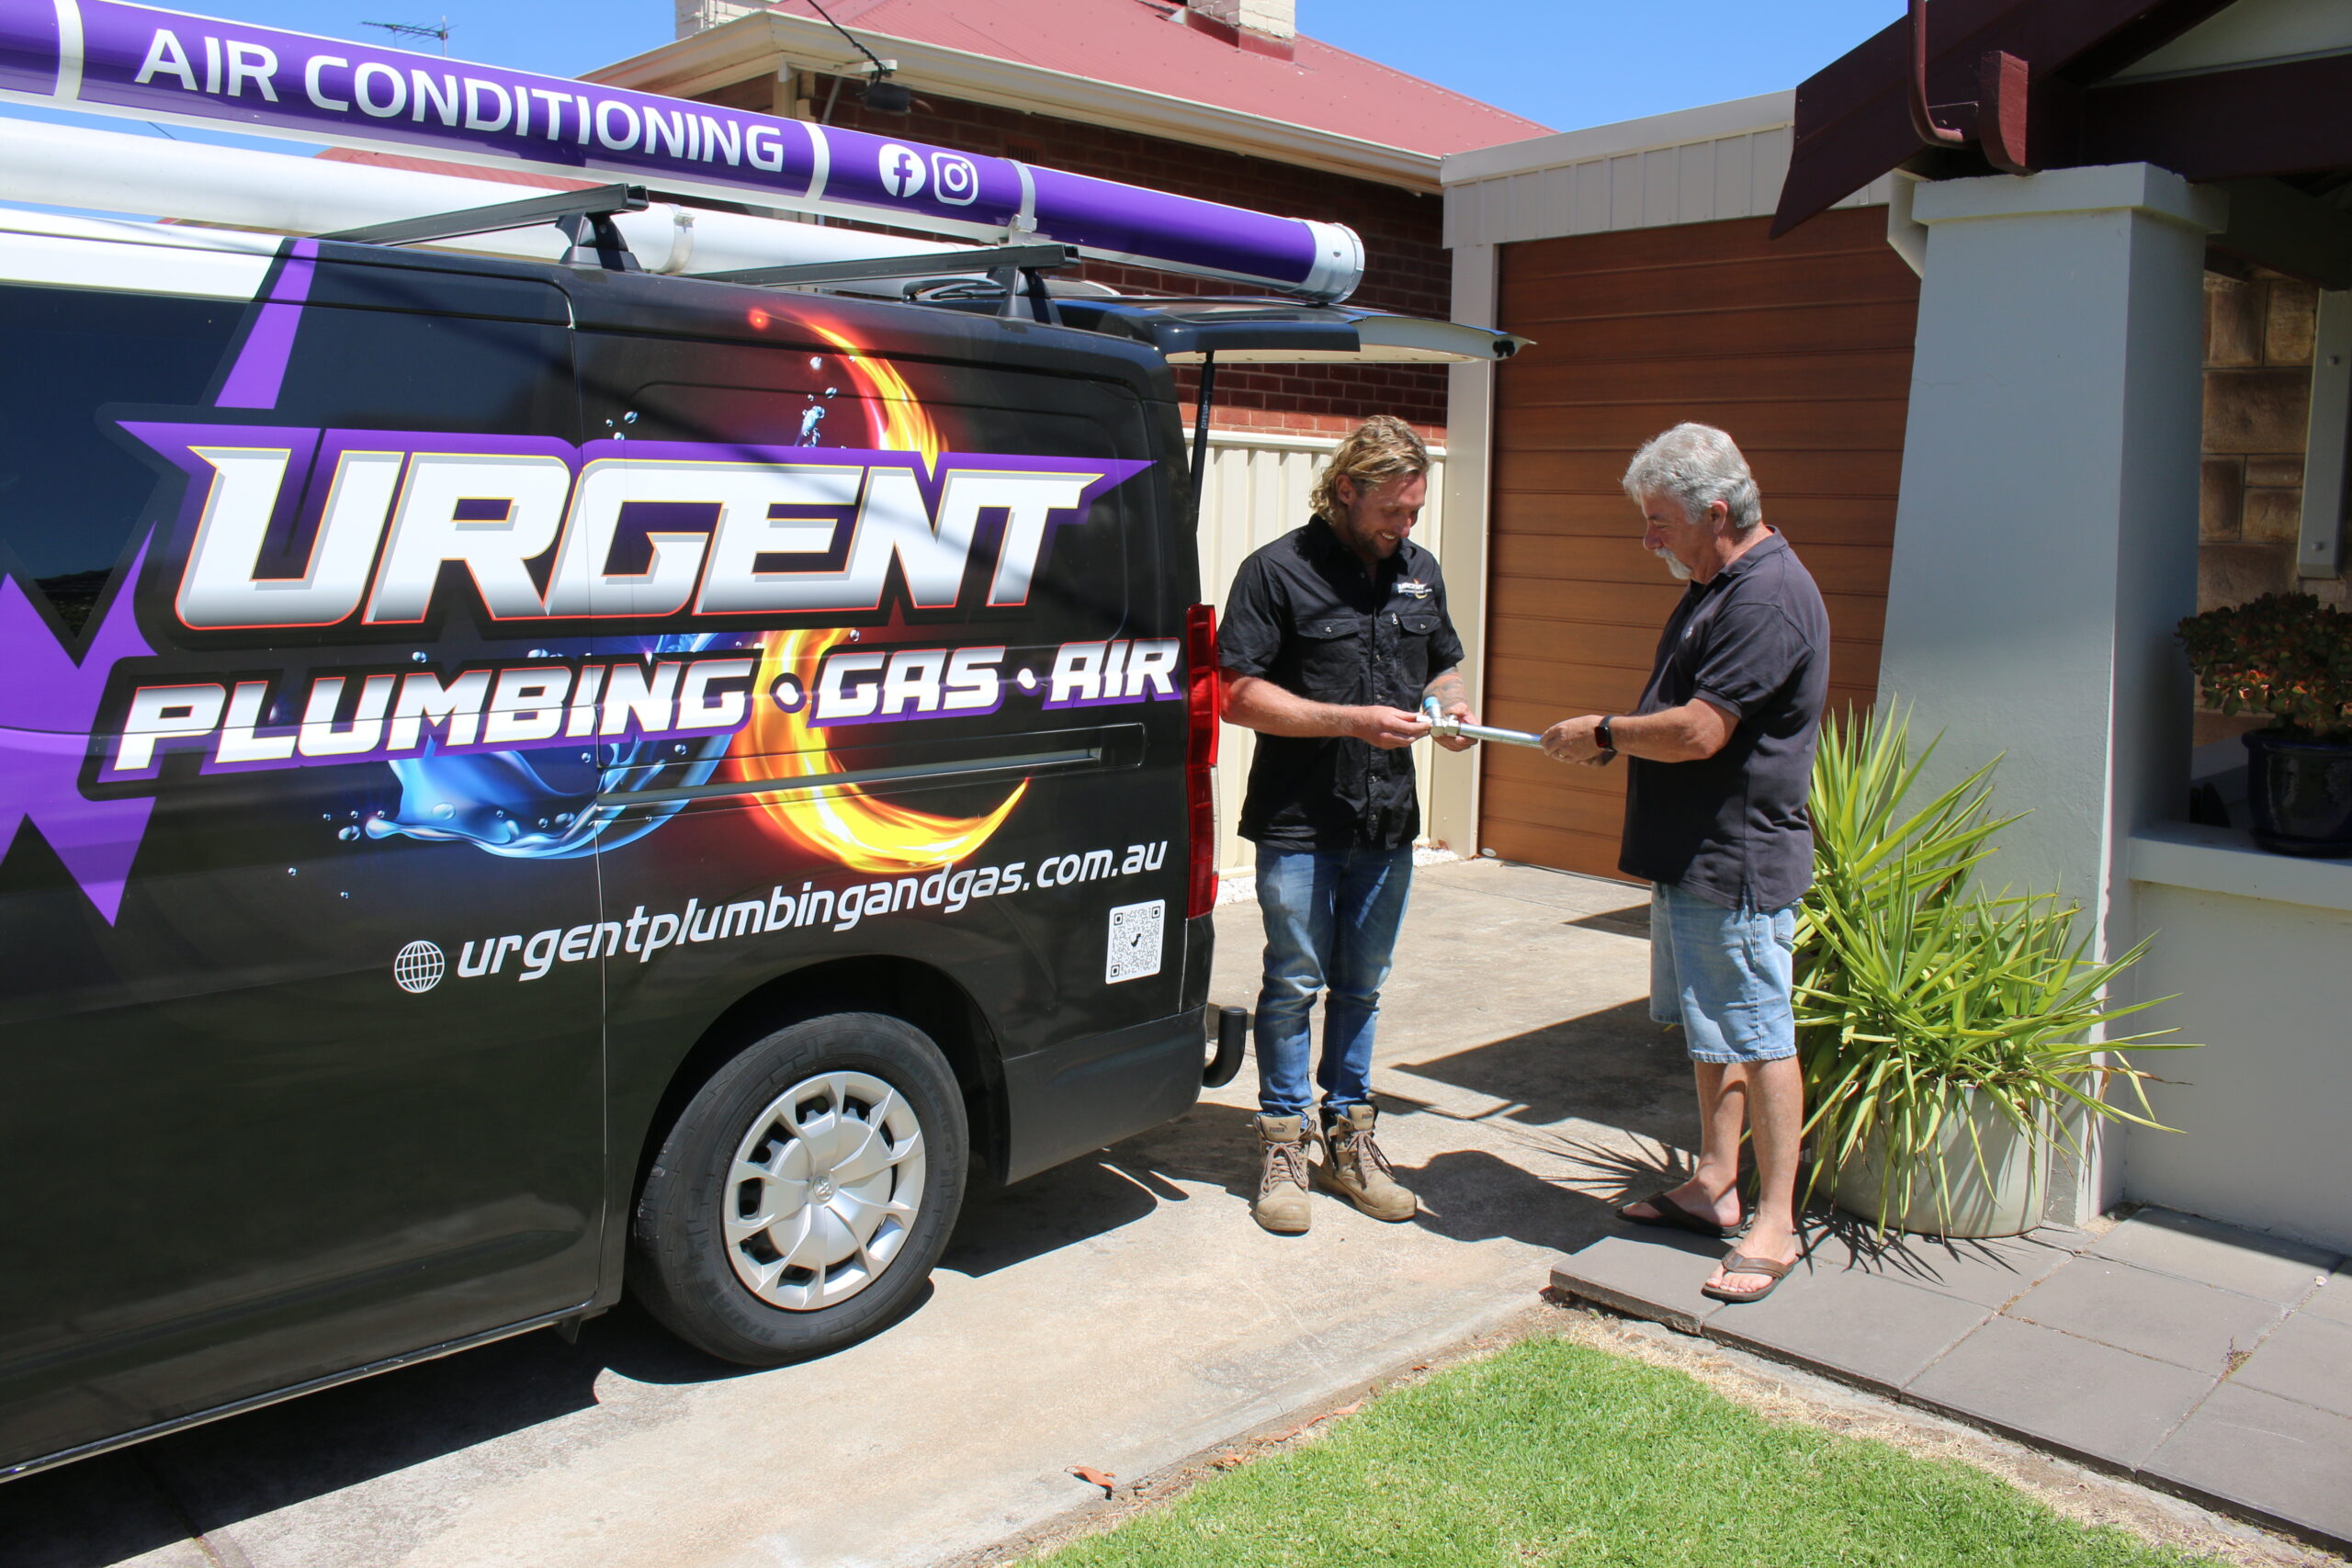 Urgent Plumbing provides expert plumbing, gas and air conditioning across Adelaide